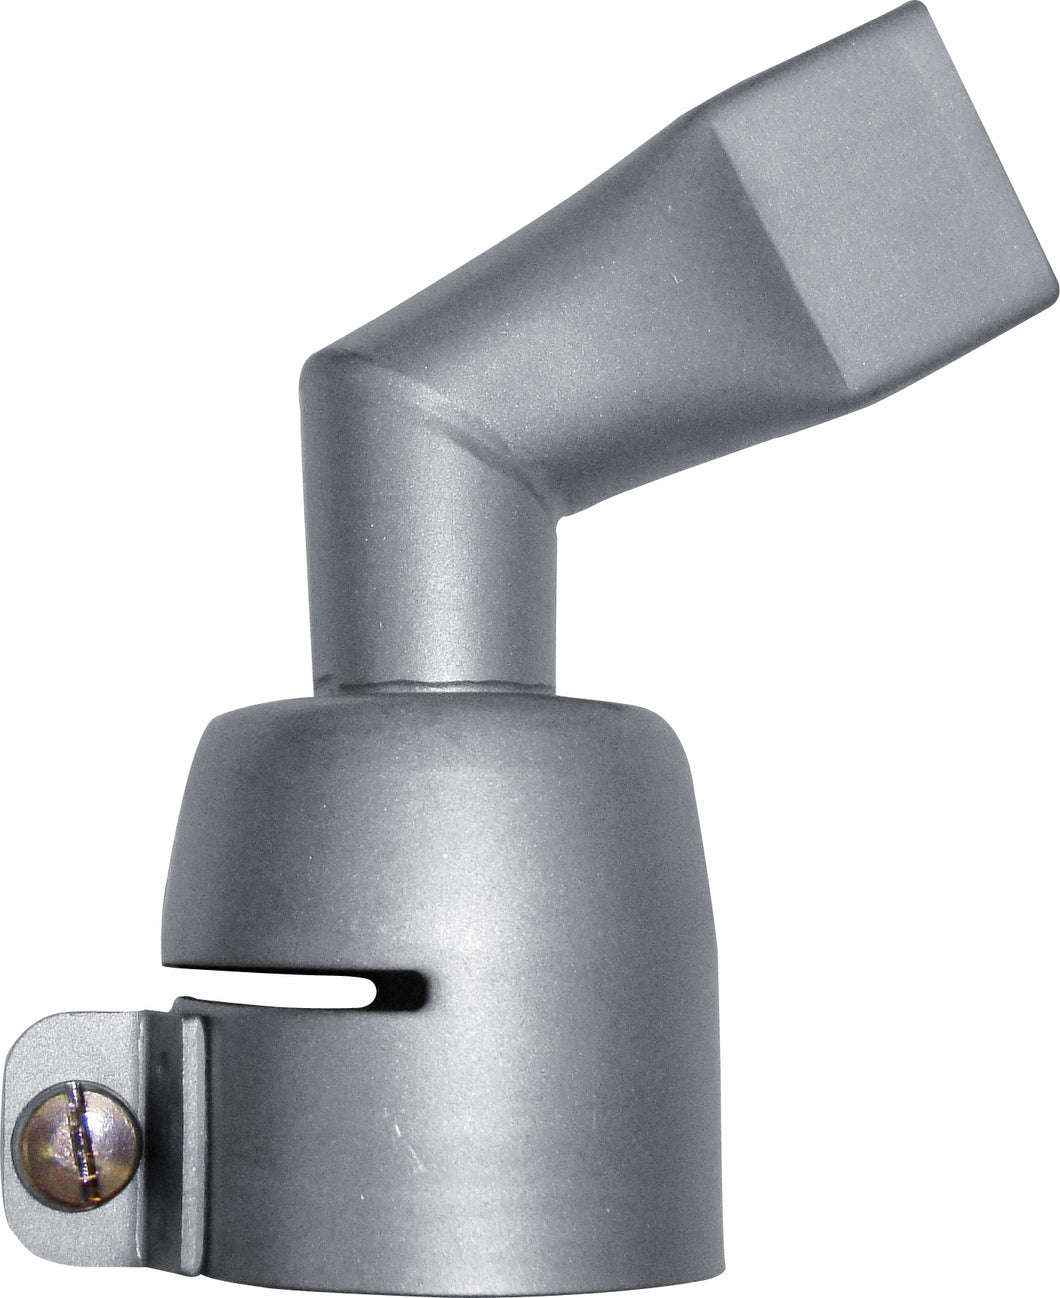 Angled wide slot nozzle 20mm 60°